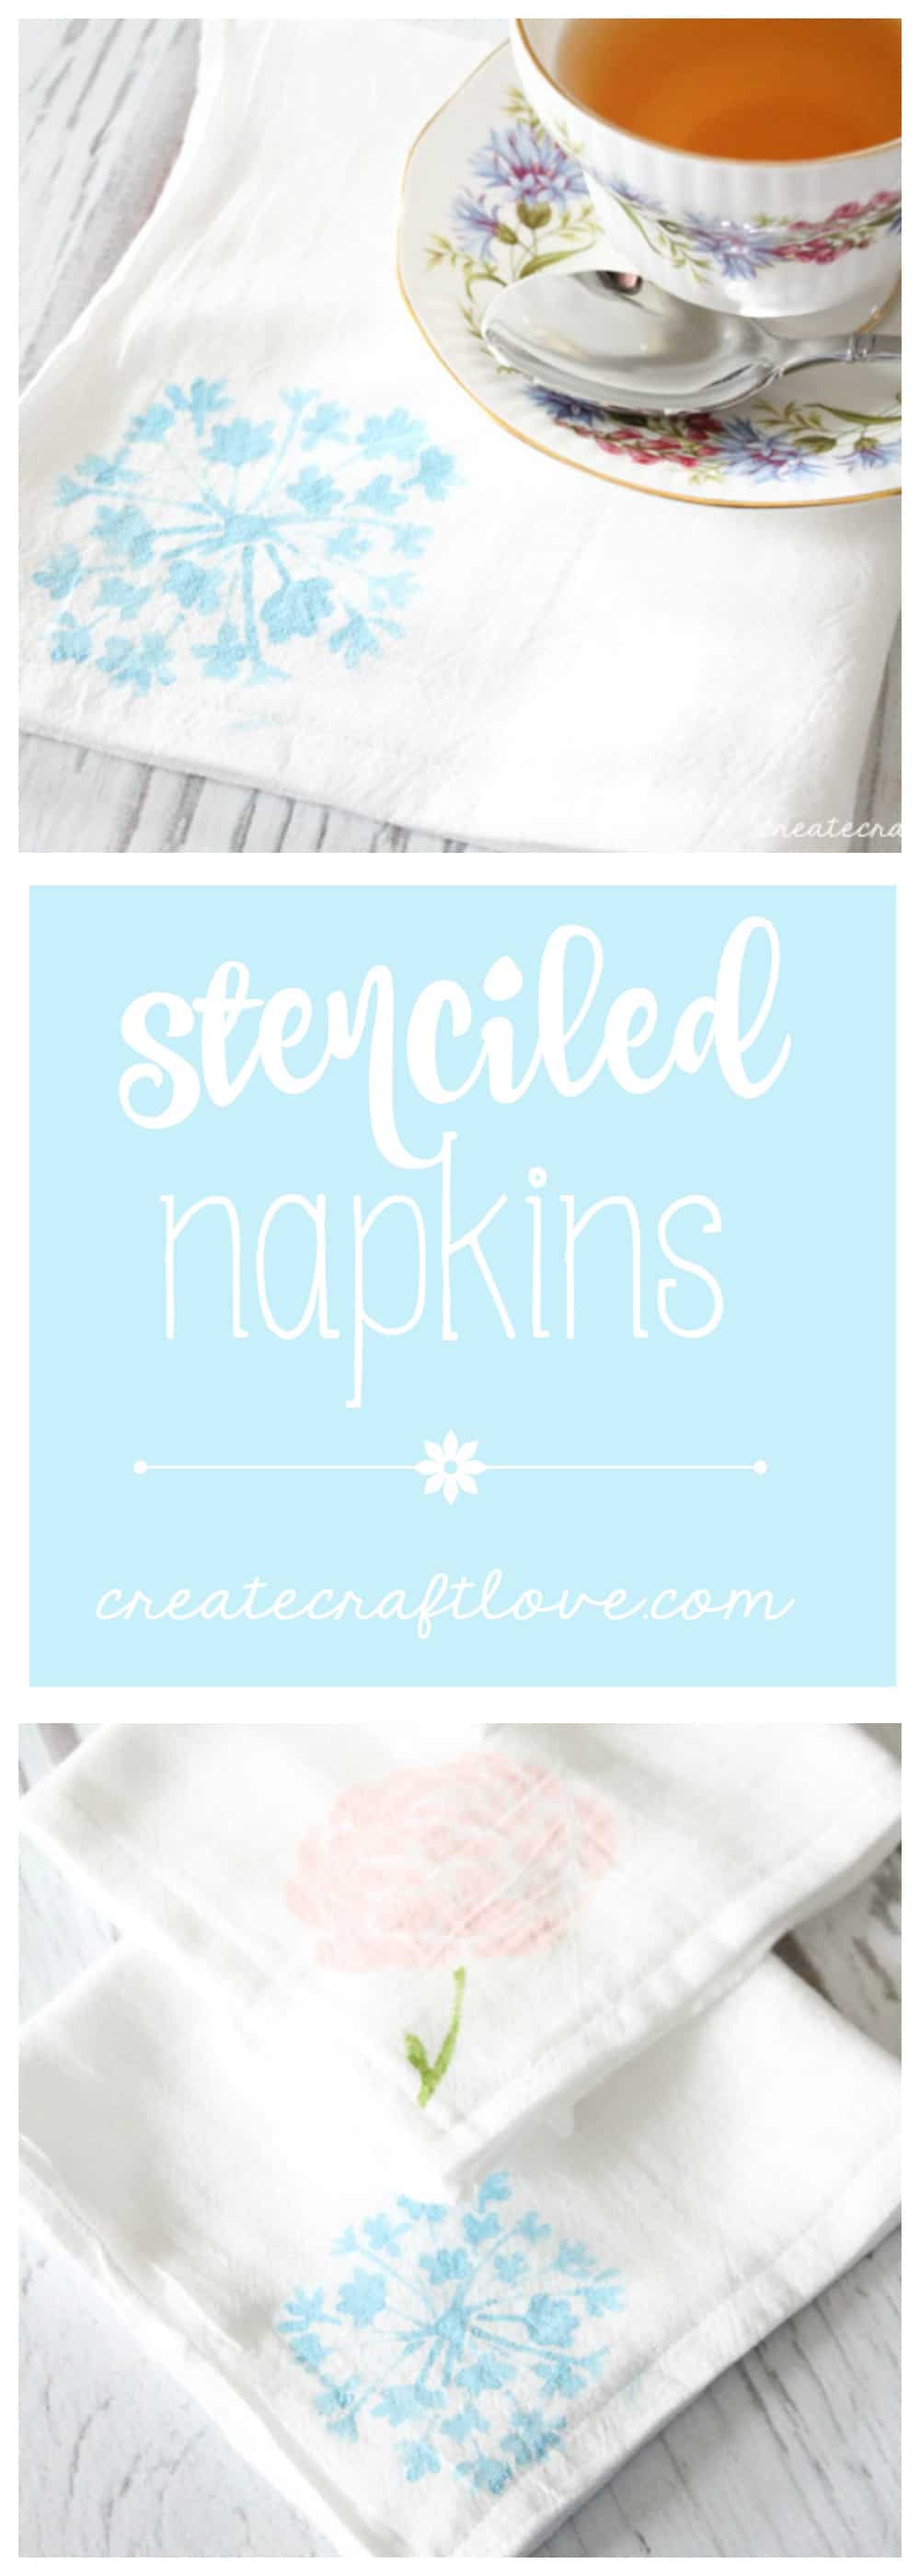 Handmade Stenciled Napkins are so easy that kids can make them too!